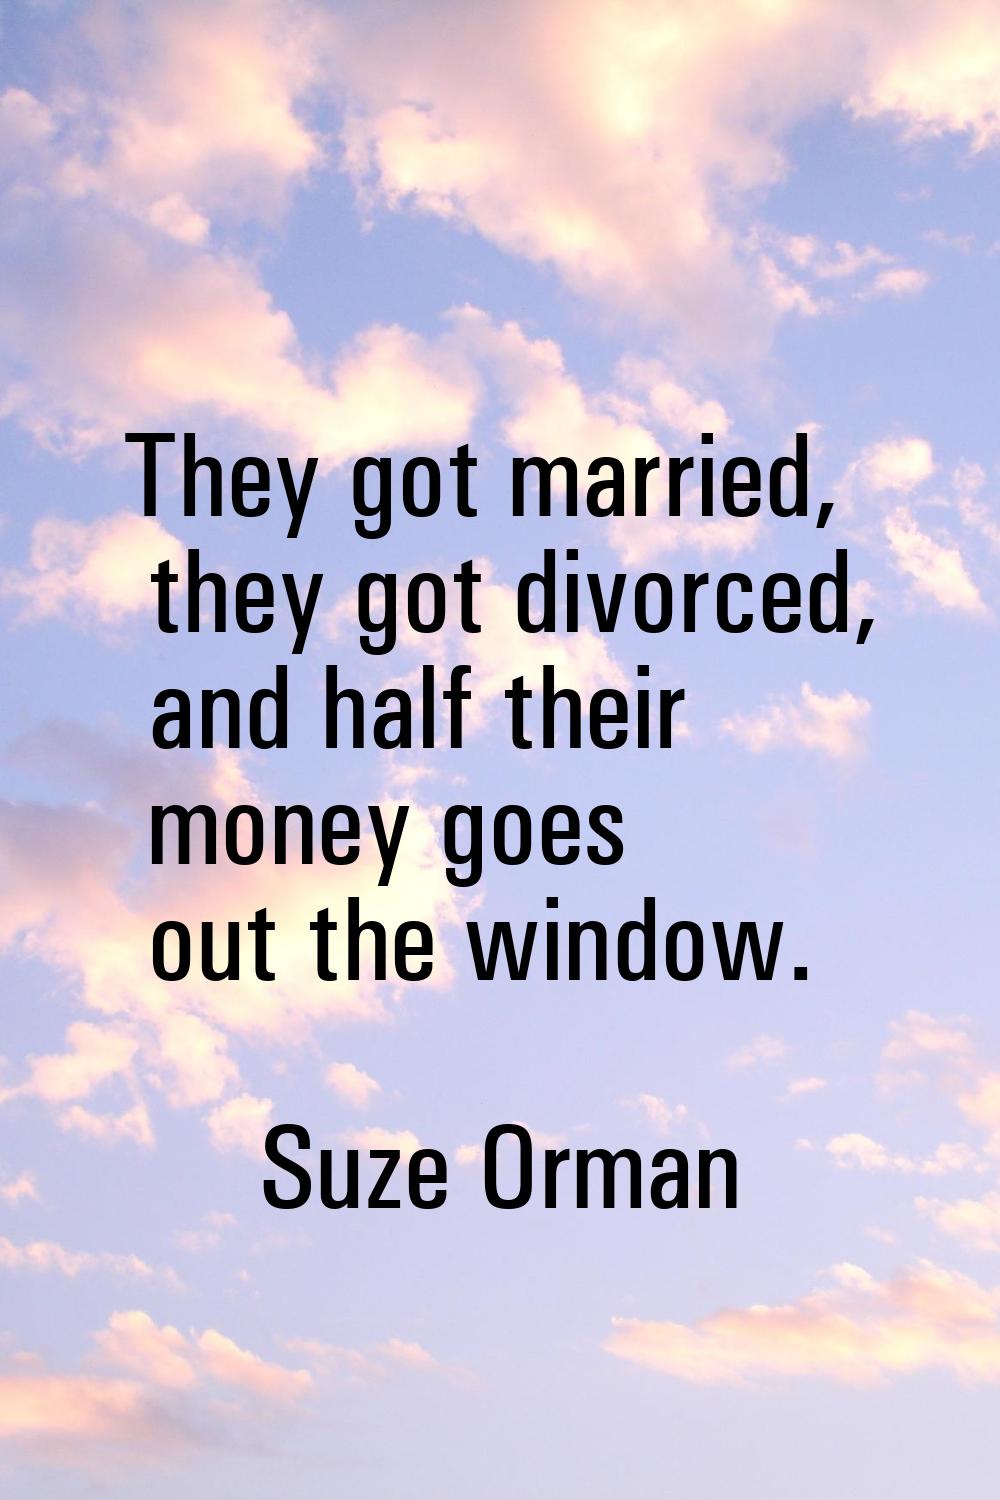 They got married, they got divorced, and half their money goes out the window.